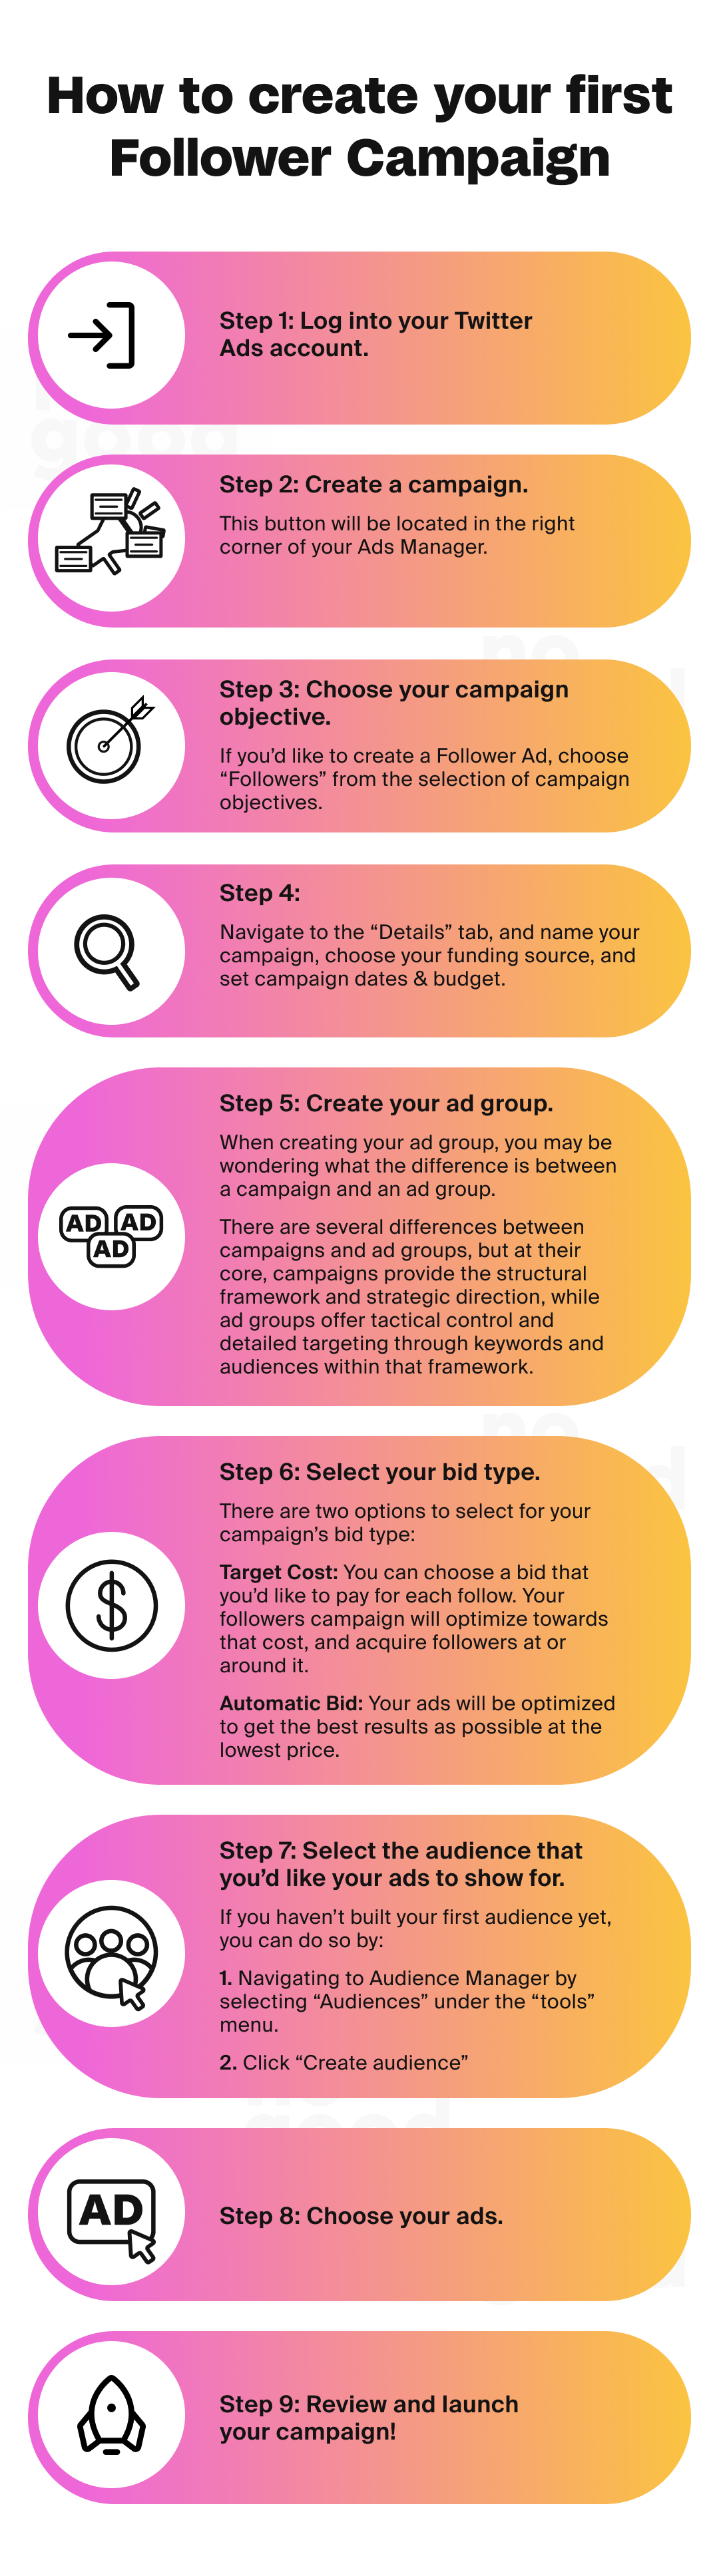 Creating your first follower campaign